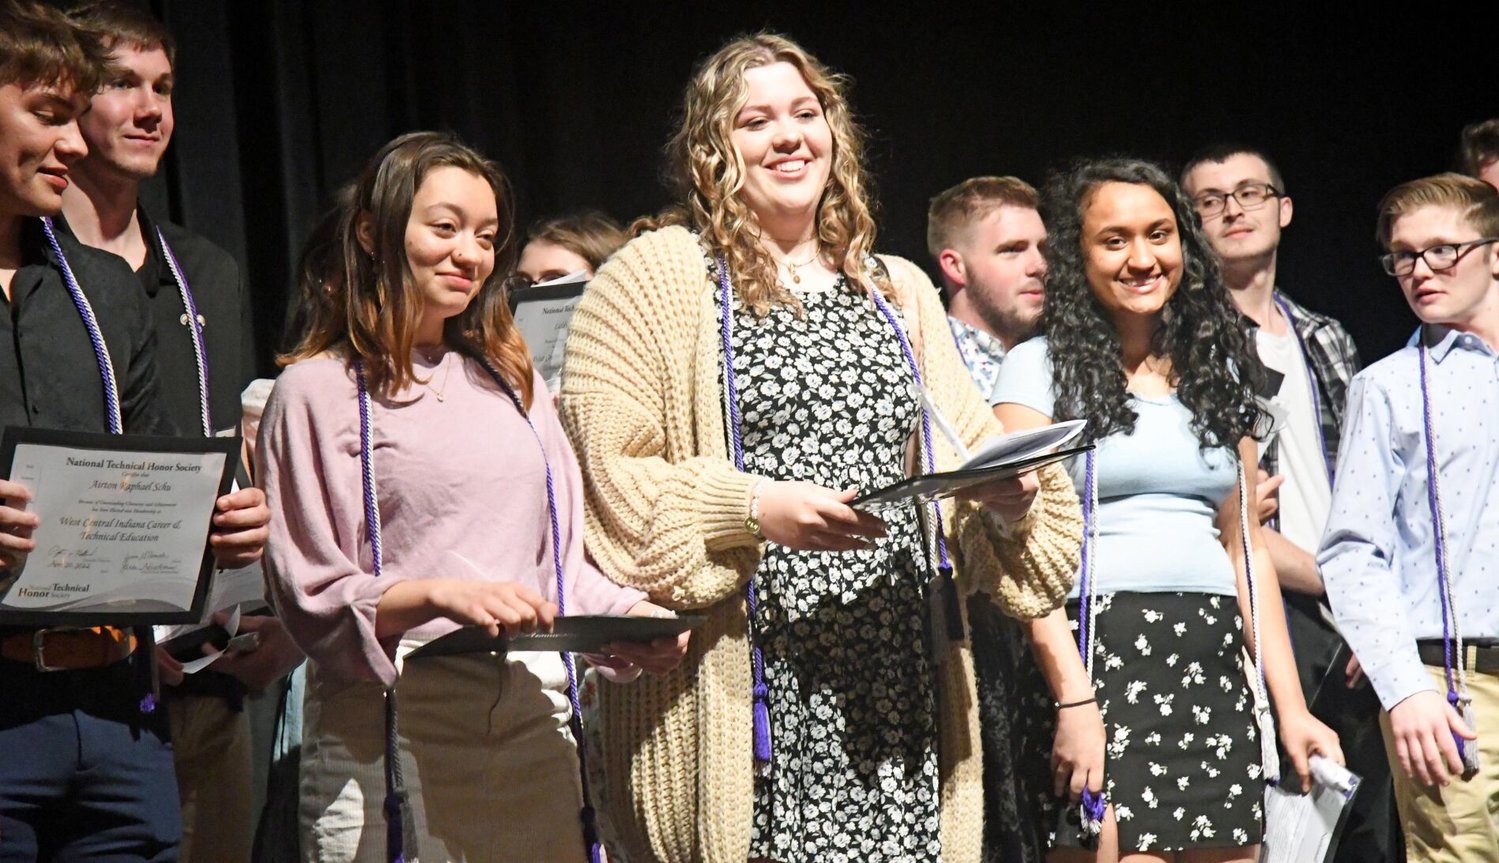 West Central Indiana Career and Technical Education students from Western Boone, Crawfordsville, North Montgomery and South Montgomery high schools were inducted into the National Technical Honor Society on Wednesday at Western Boone.